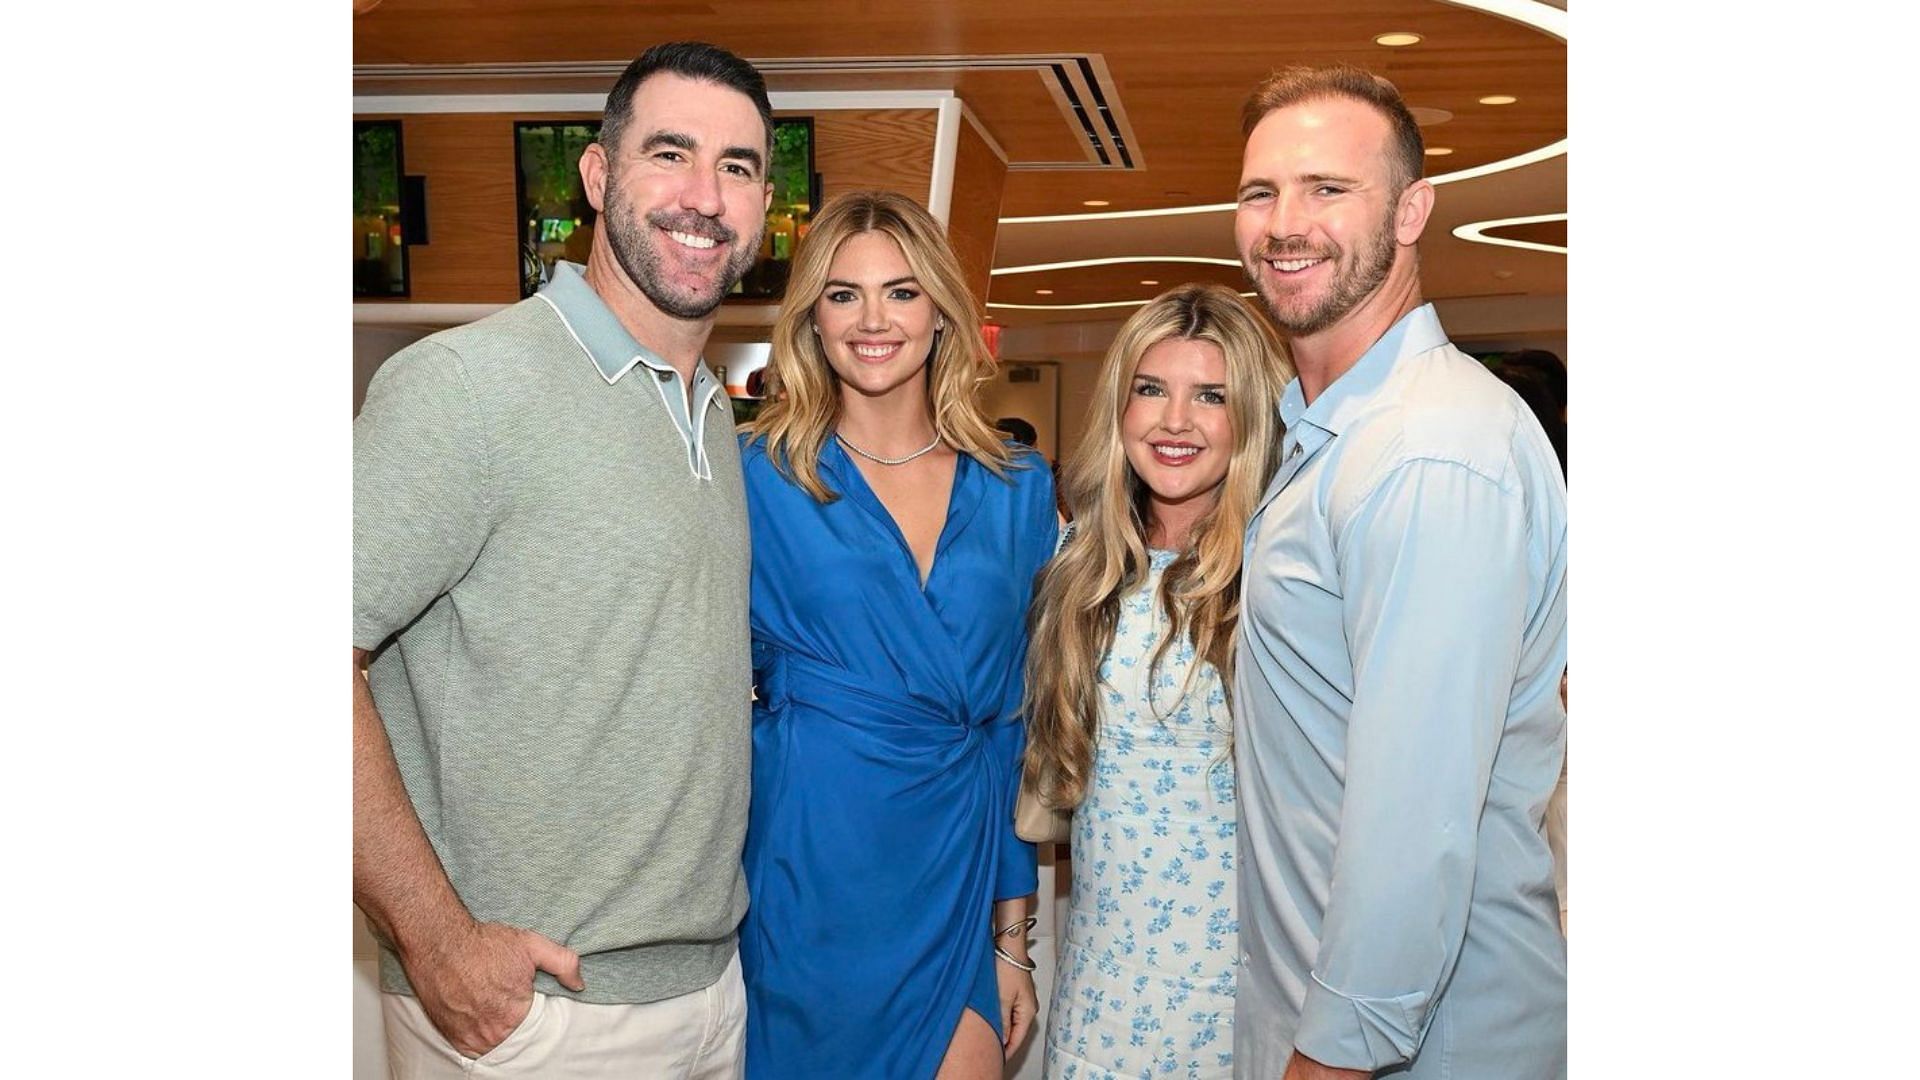 Justin Verlander and Pete Alonso out with their wives